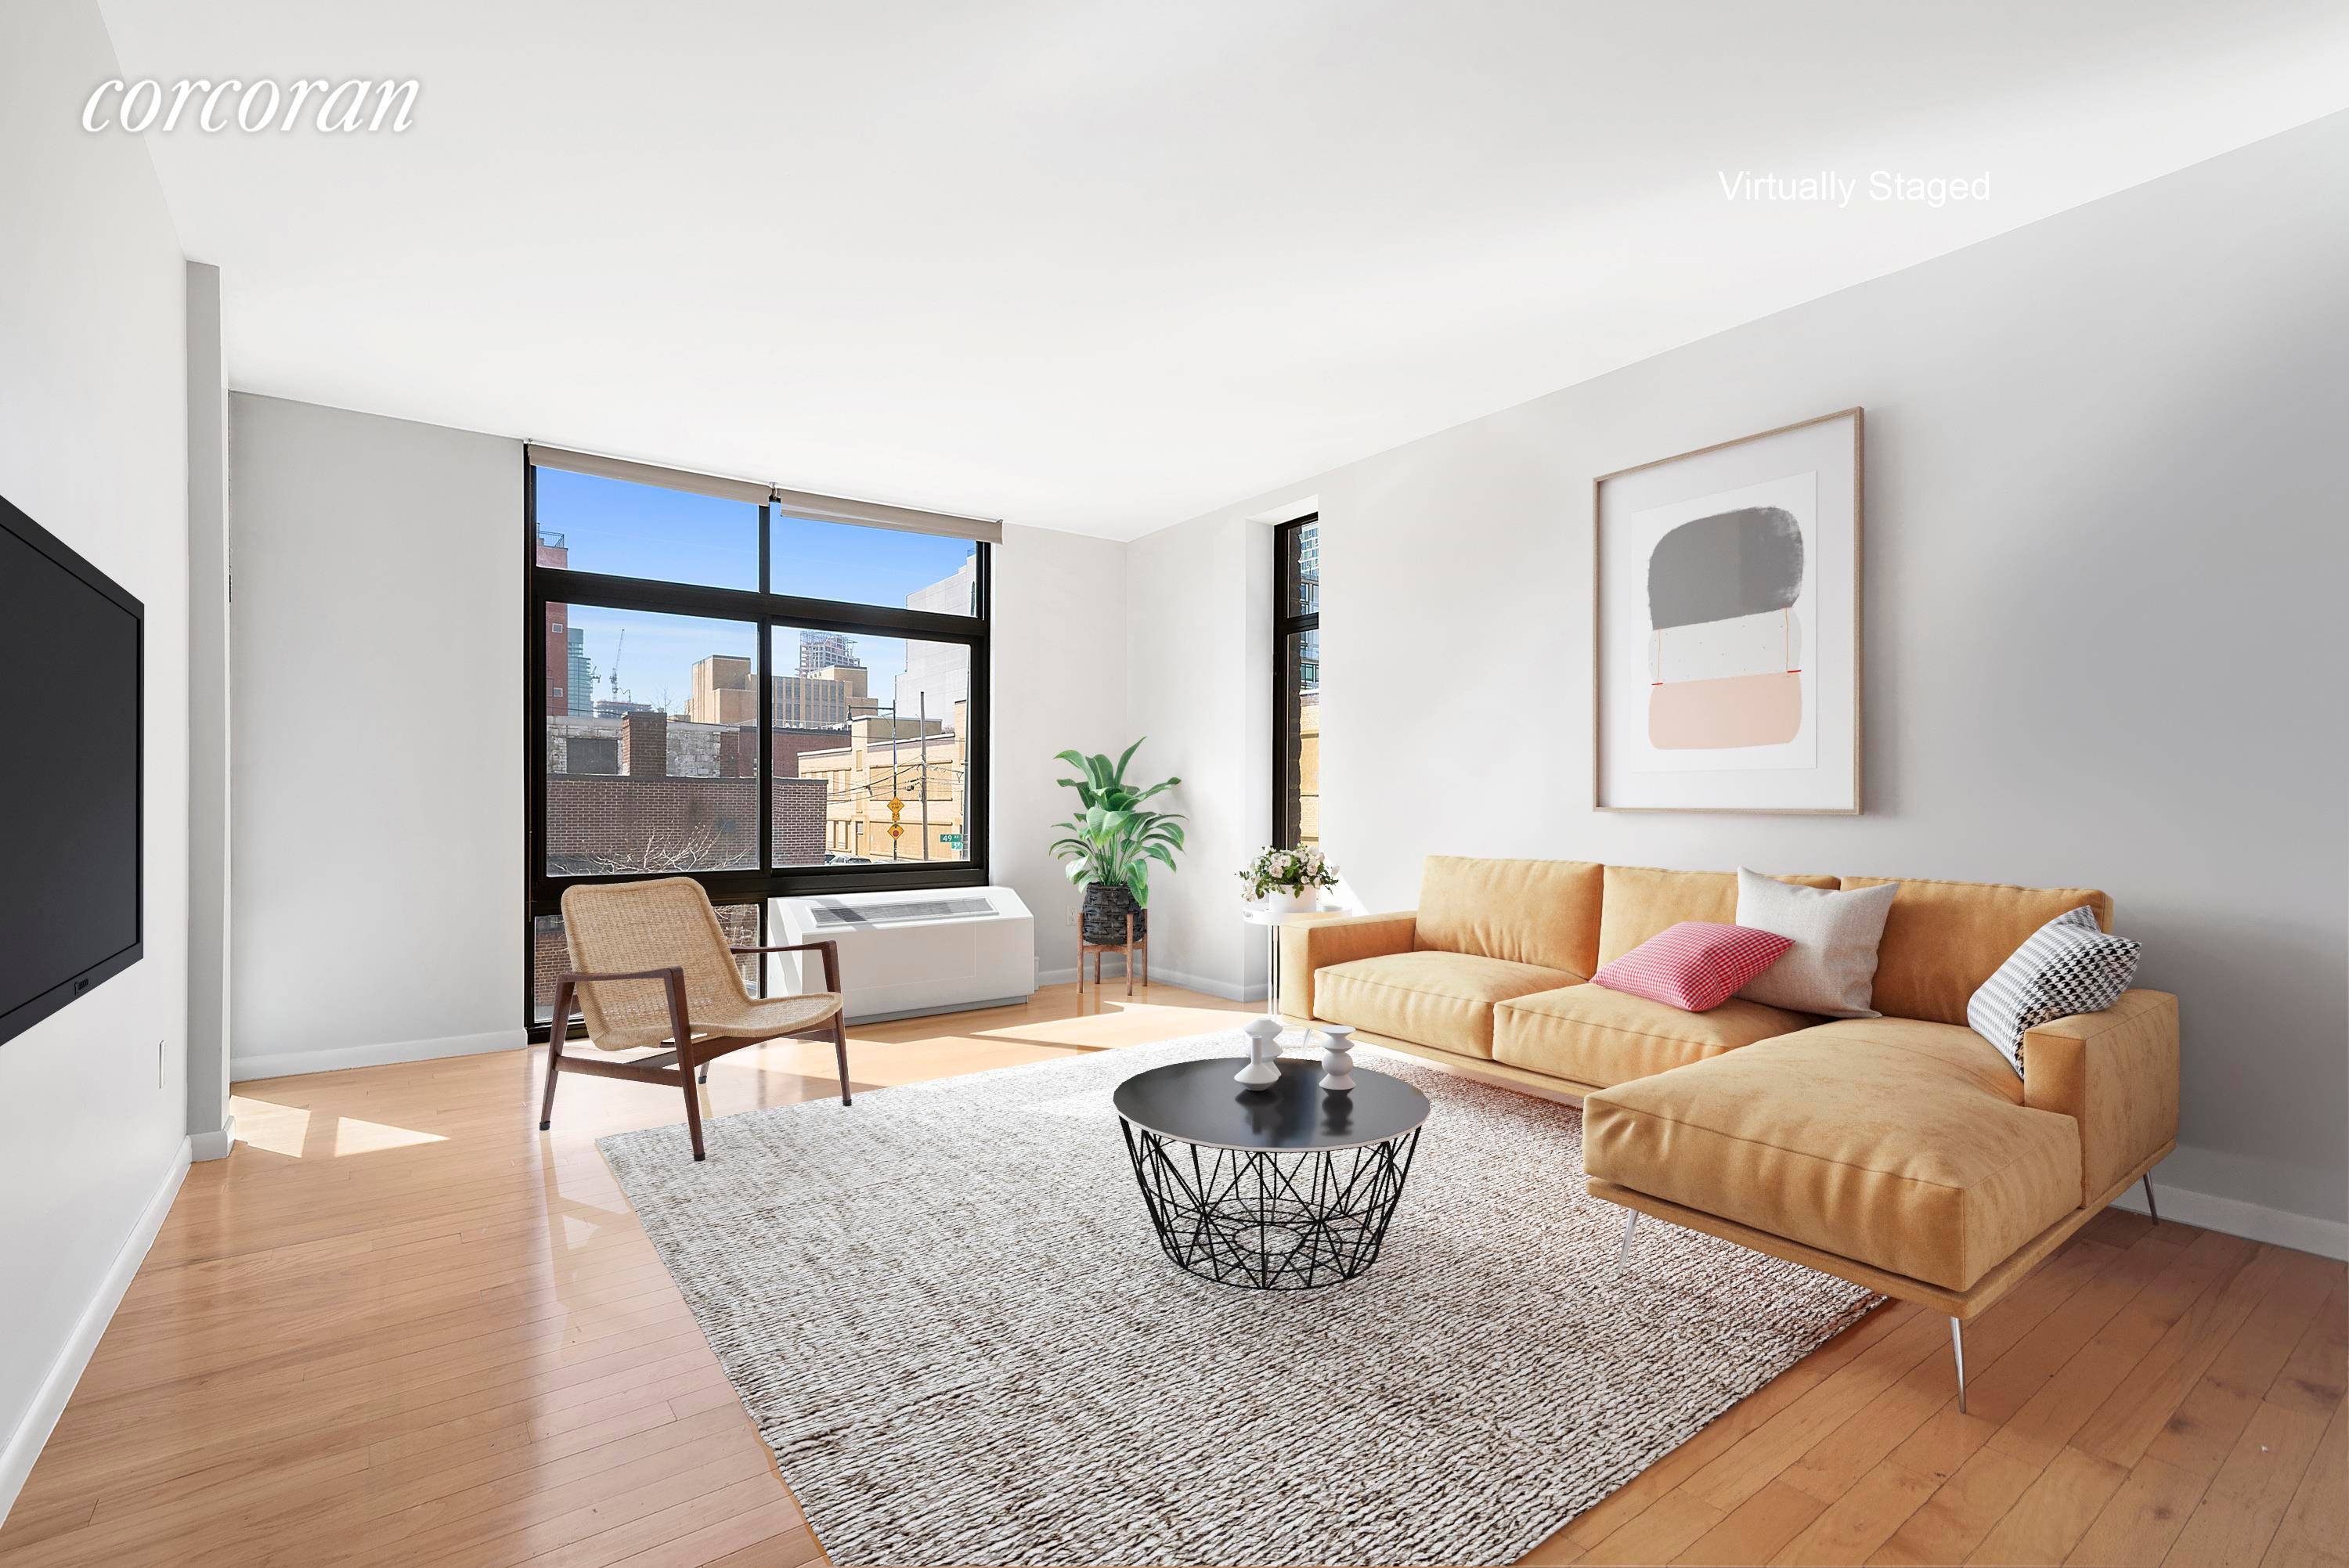 This spacious and sun drenched 2 bedroom 2 bathroom residence with 1, 114 SF is located in the heart of Hunter's Point, Long Island City.